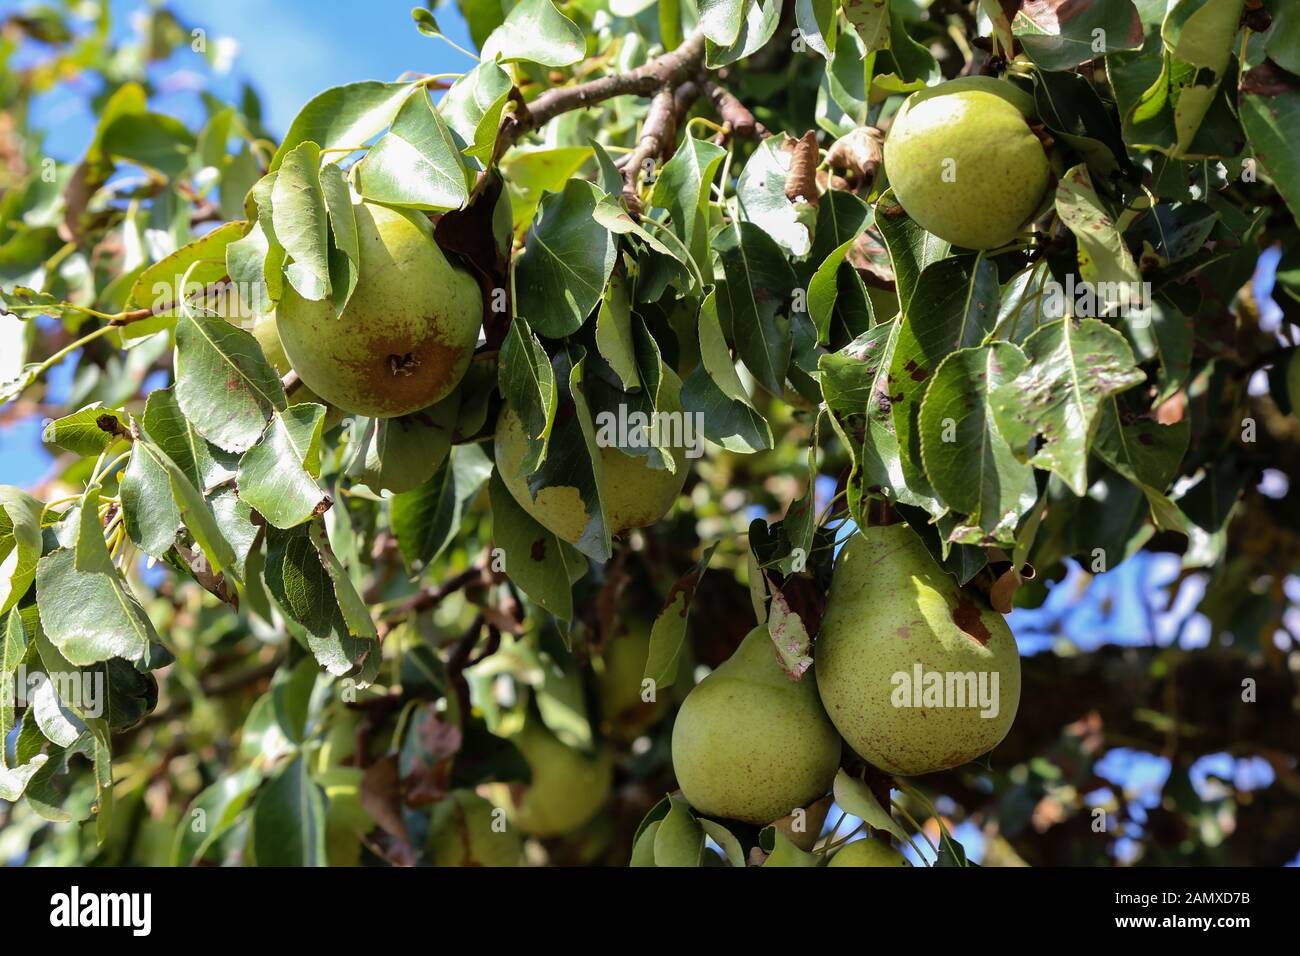 Green wild pears ripen on a tree by the road. Stock Photo